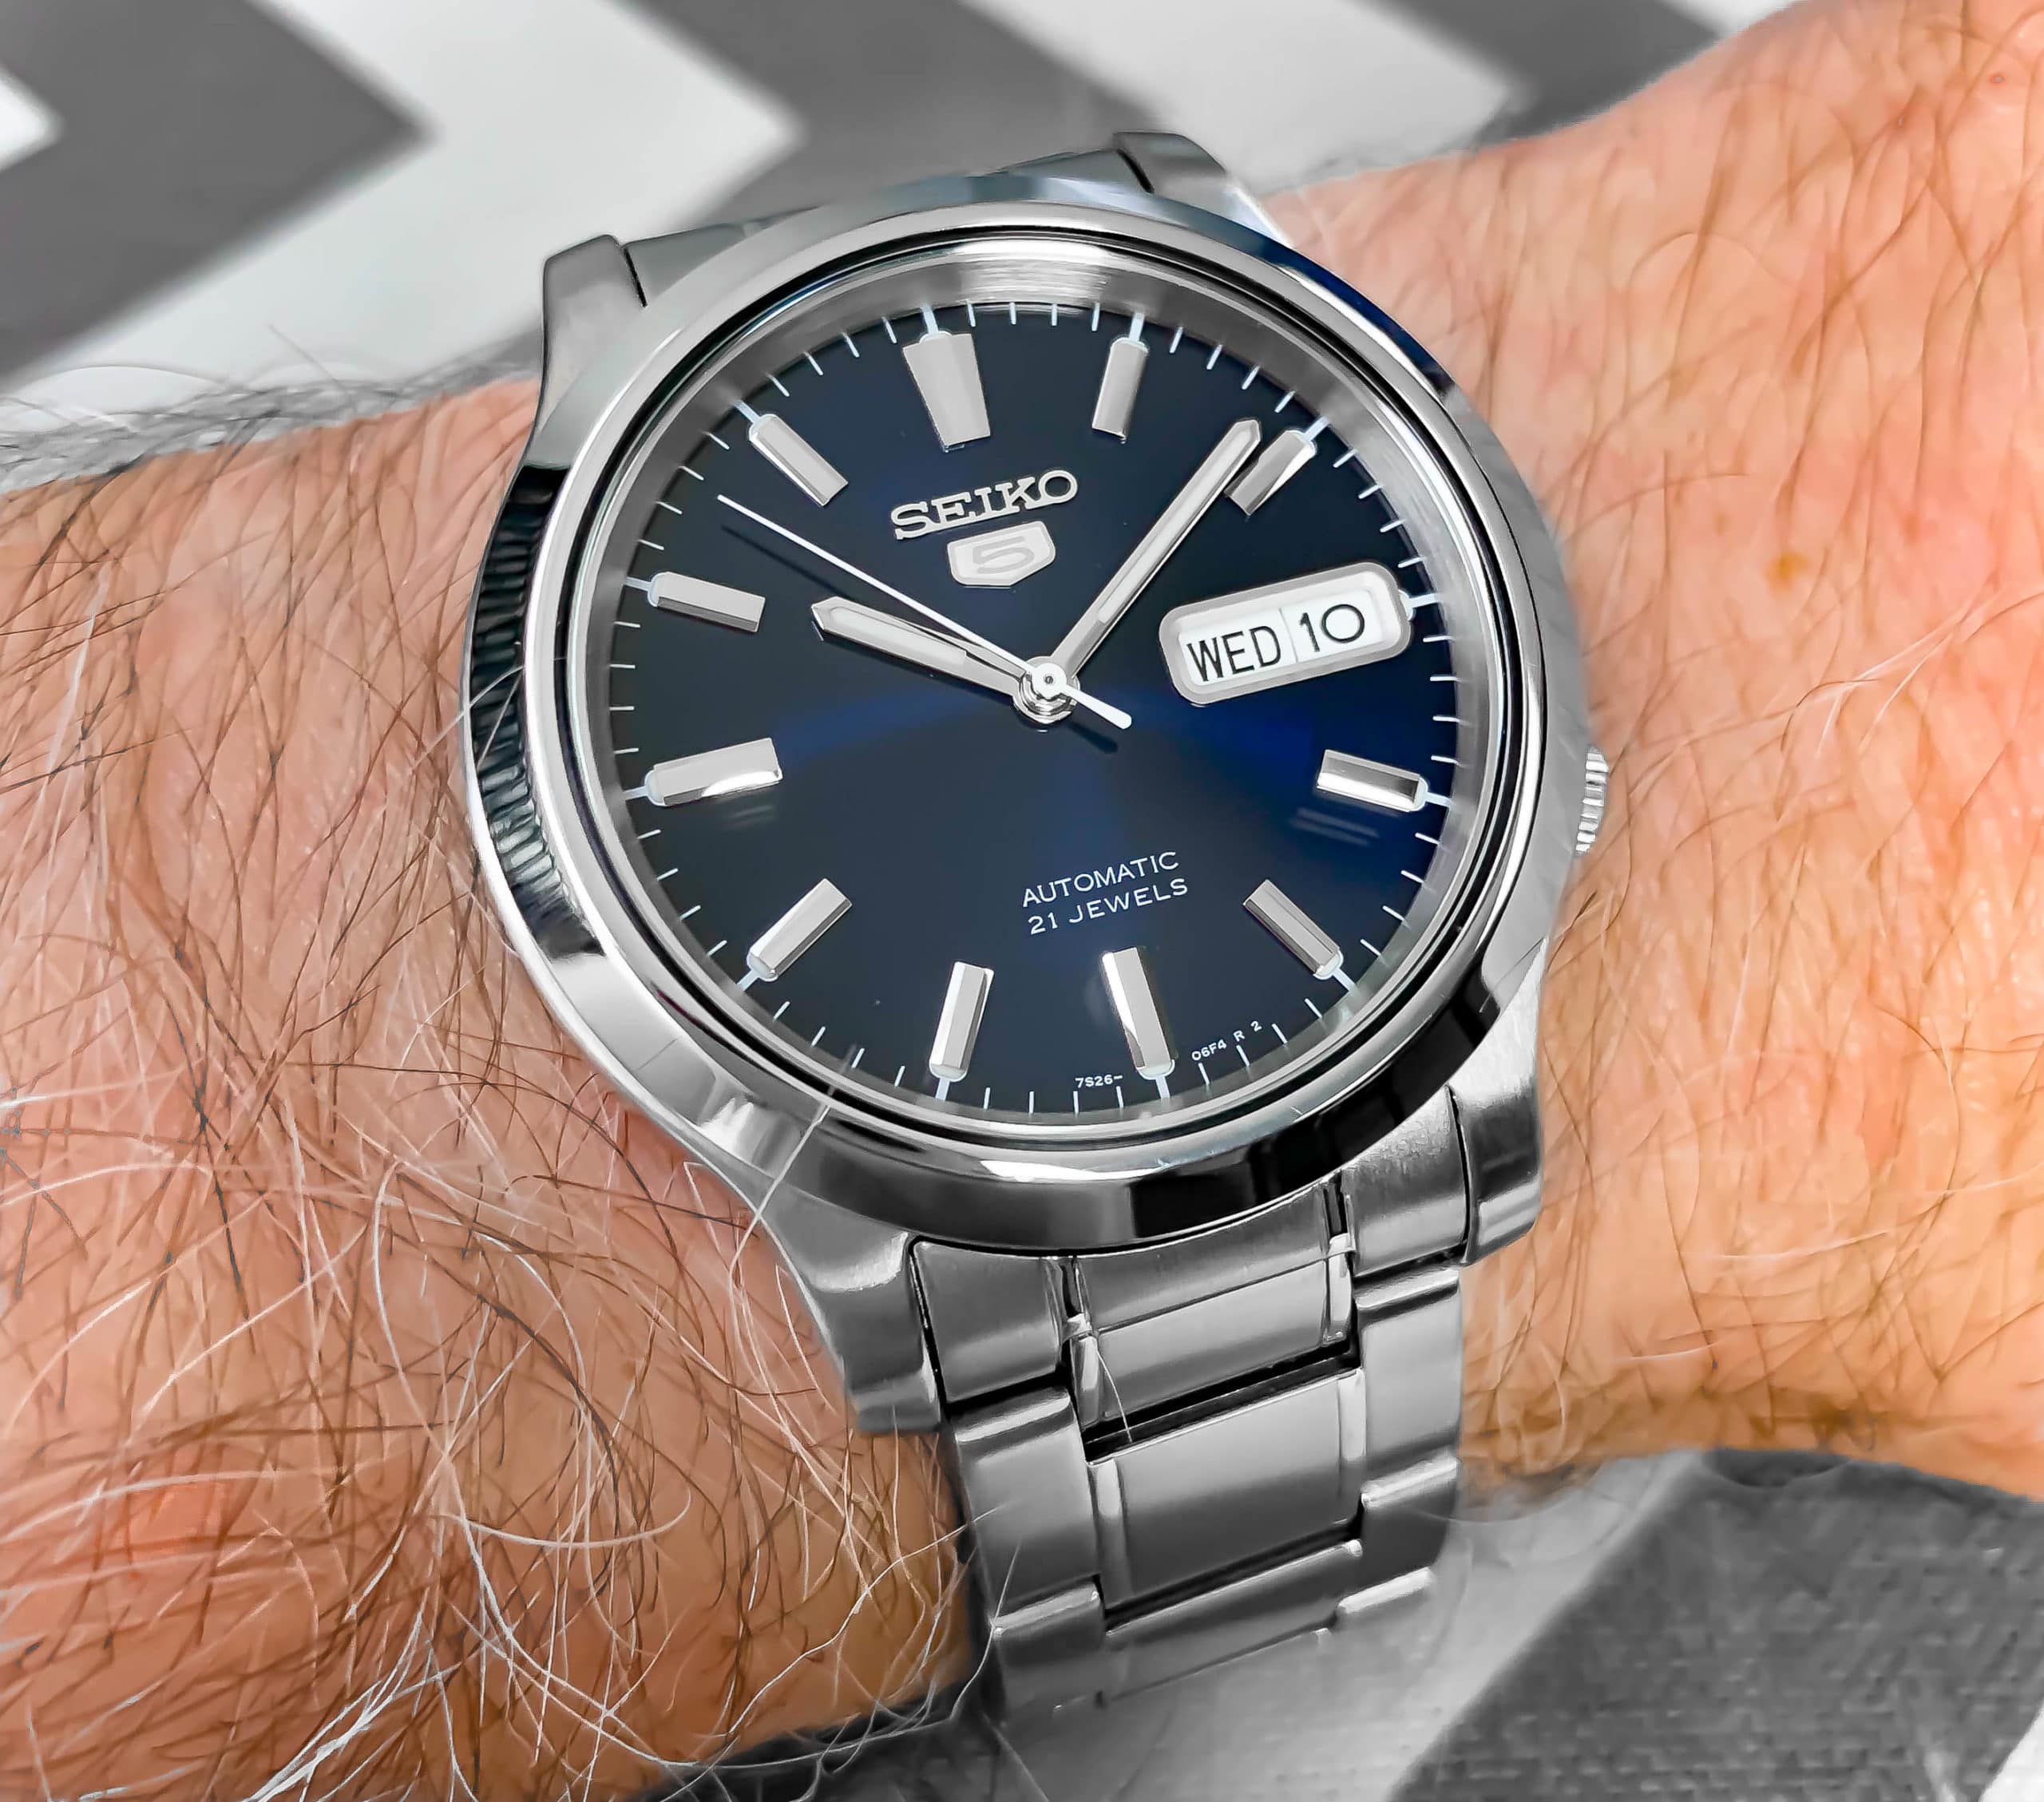 Seiko 5 SNK793 Review: Keeping It Casual and Classy in Blue